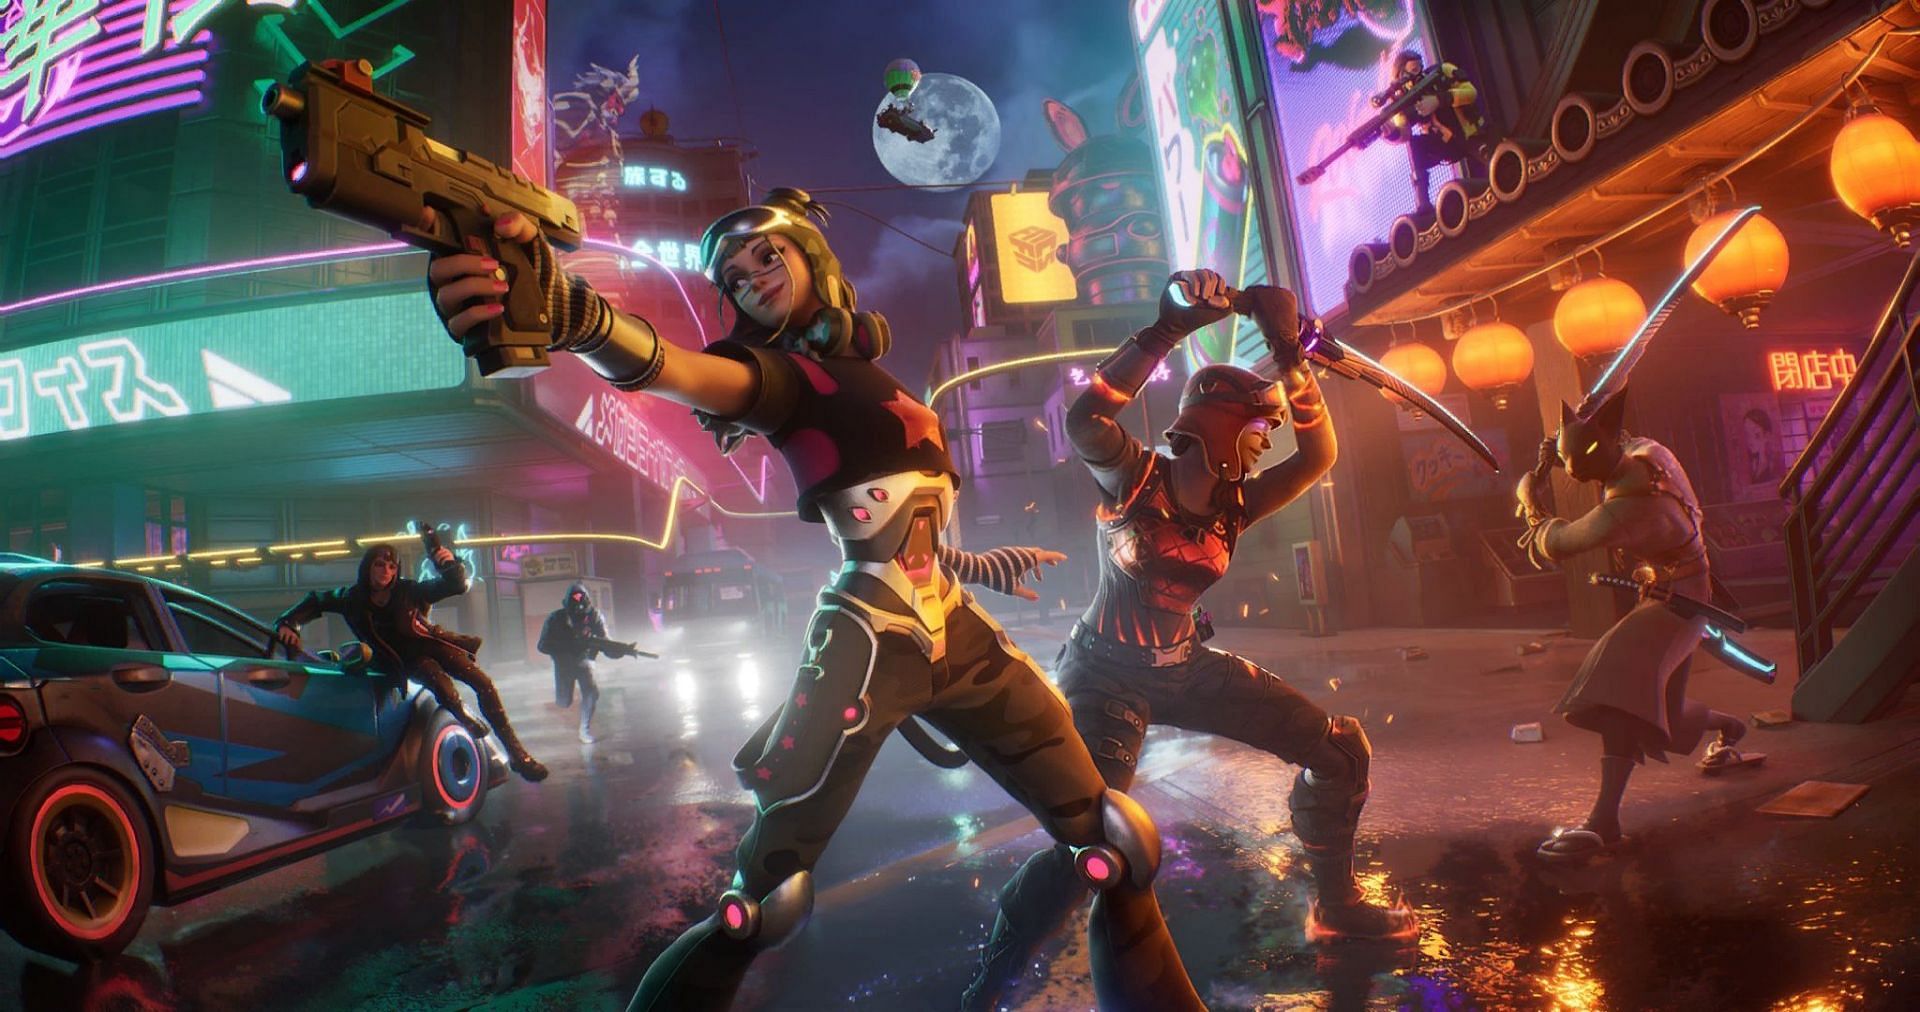 Renegade Runner should featured in the Item Shop soon (Image via Epic Games/Fortnite)